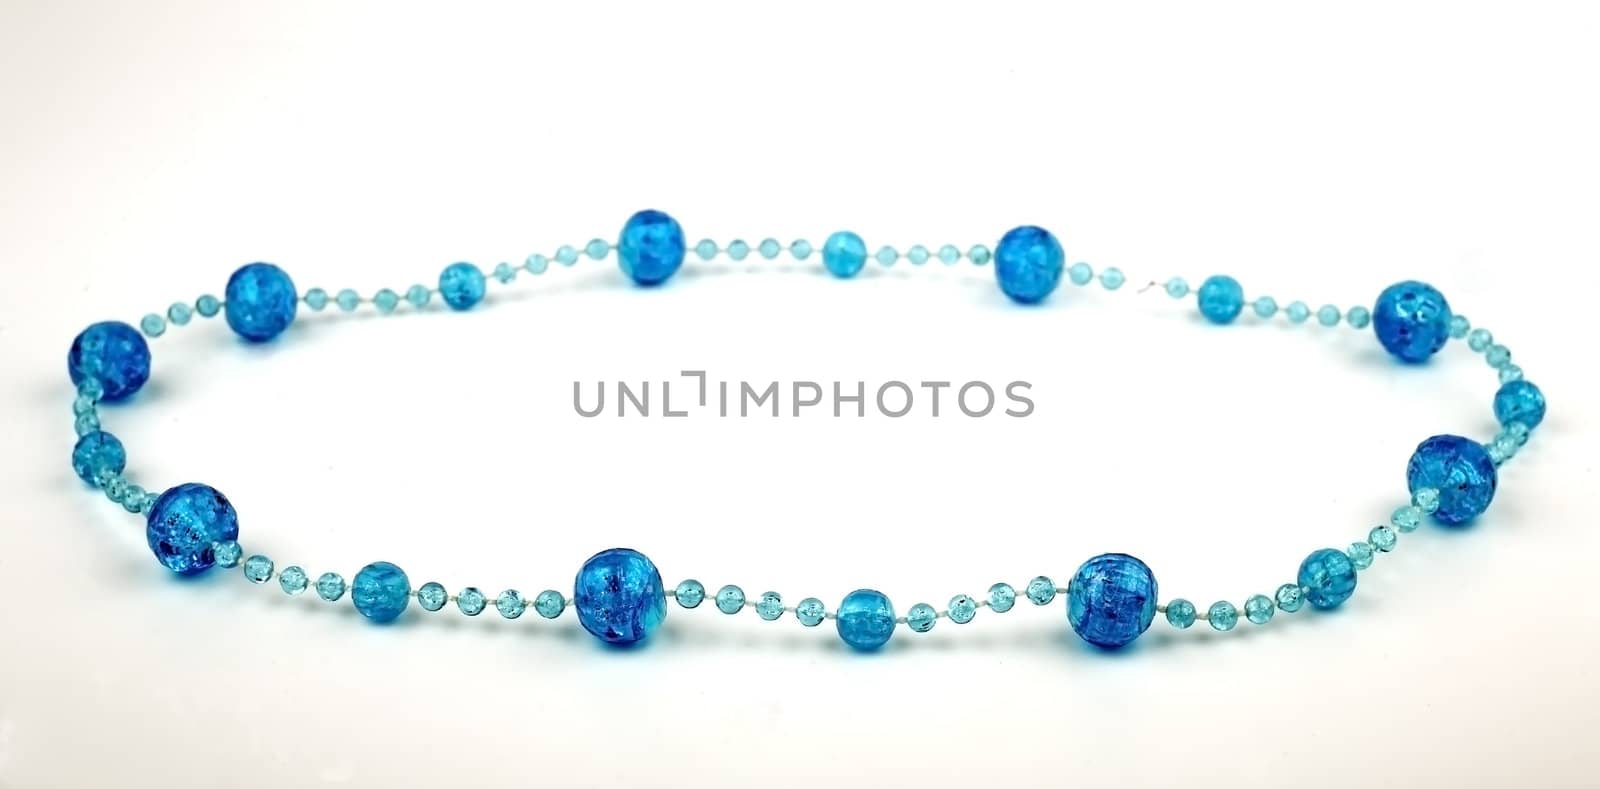 Women's jewelry, blue beads, isolated on a white background